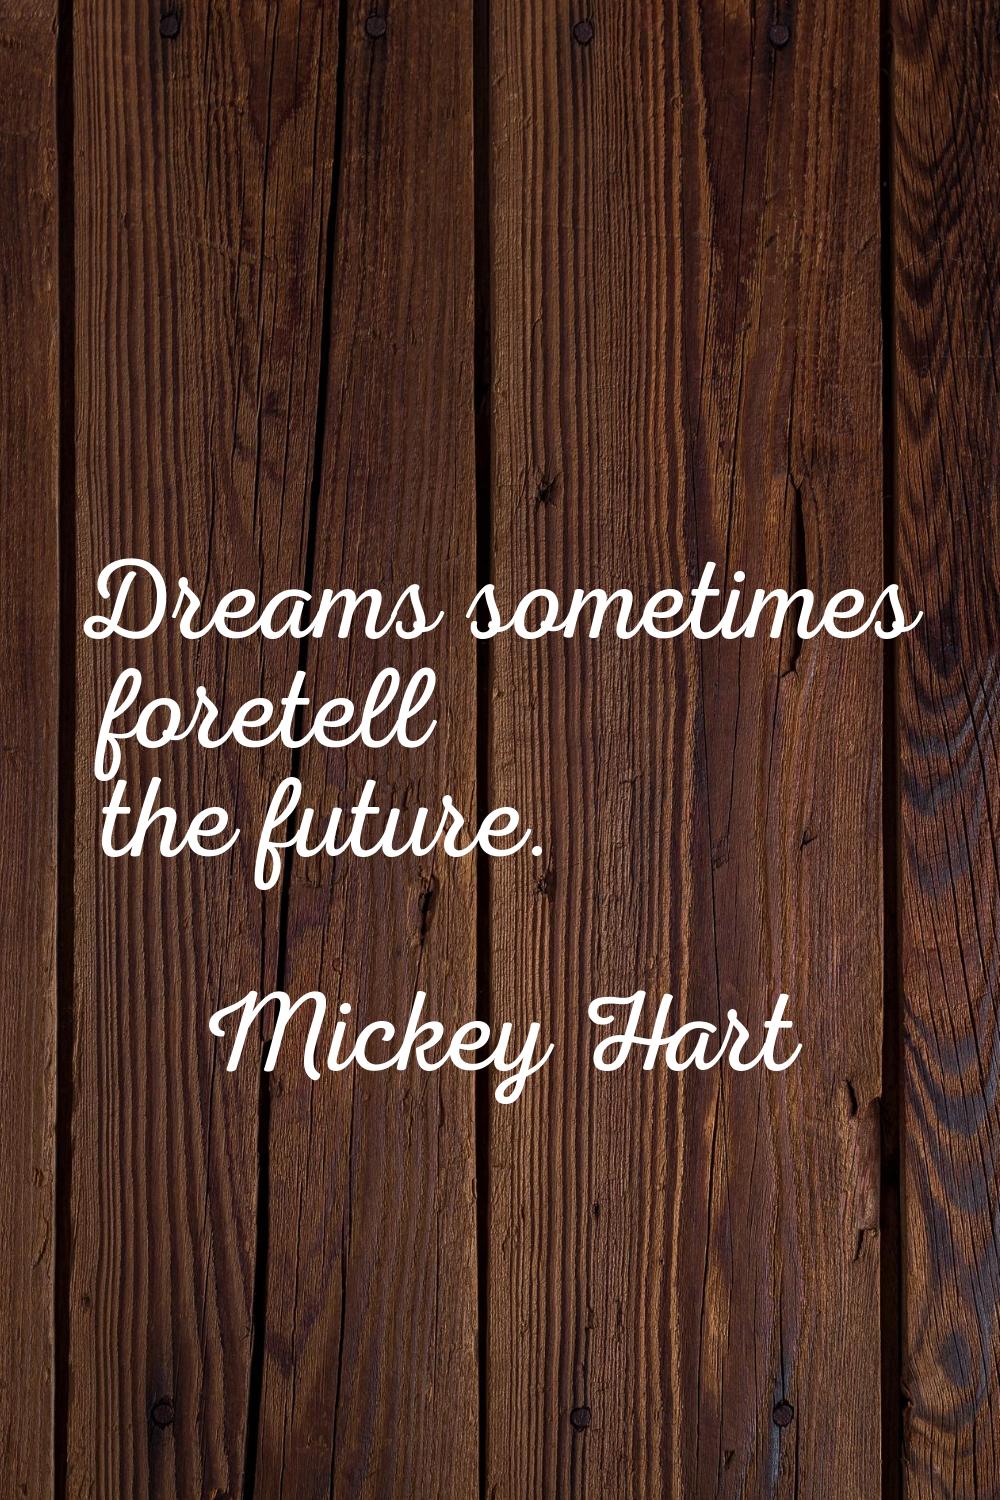 Dreams sometimes foretell the future.